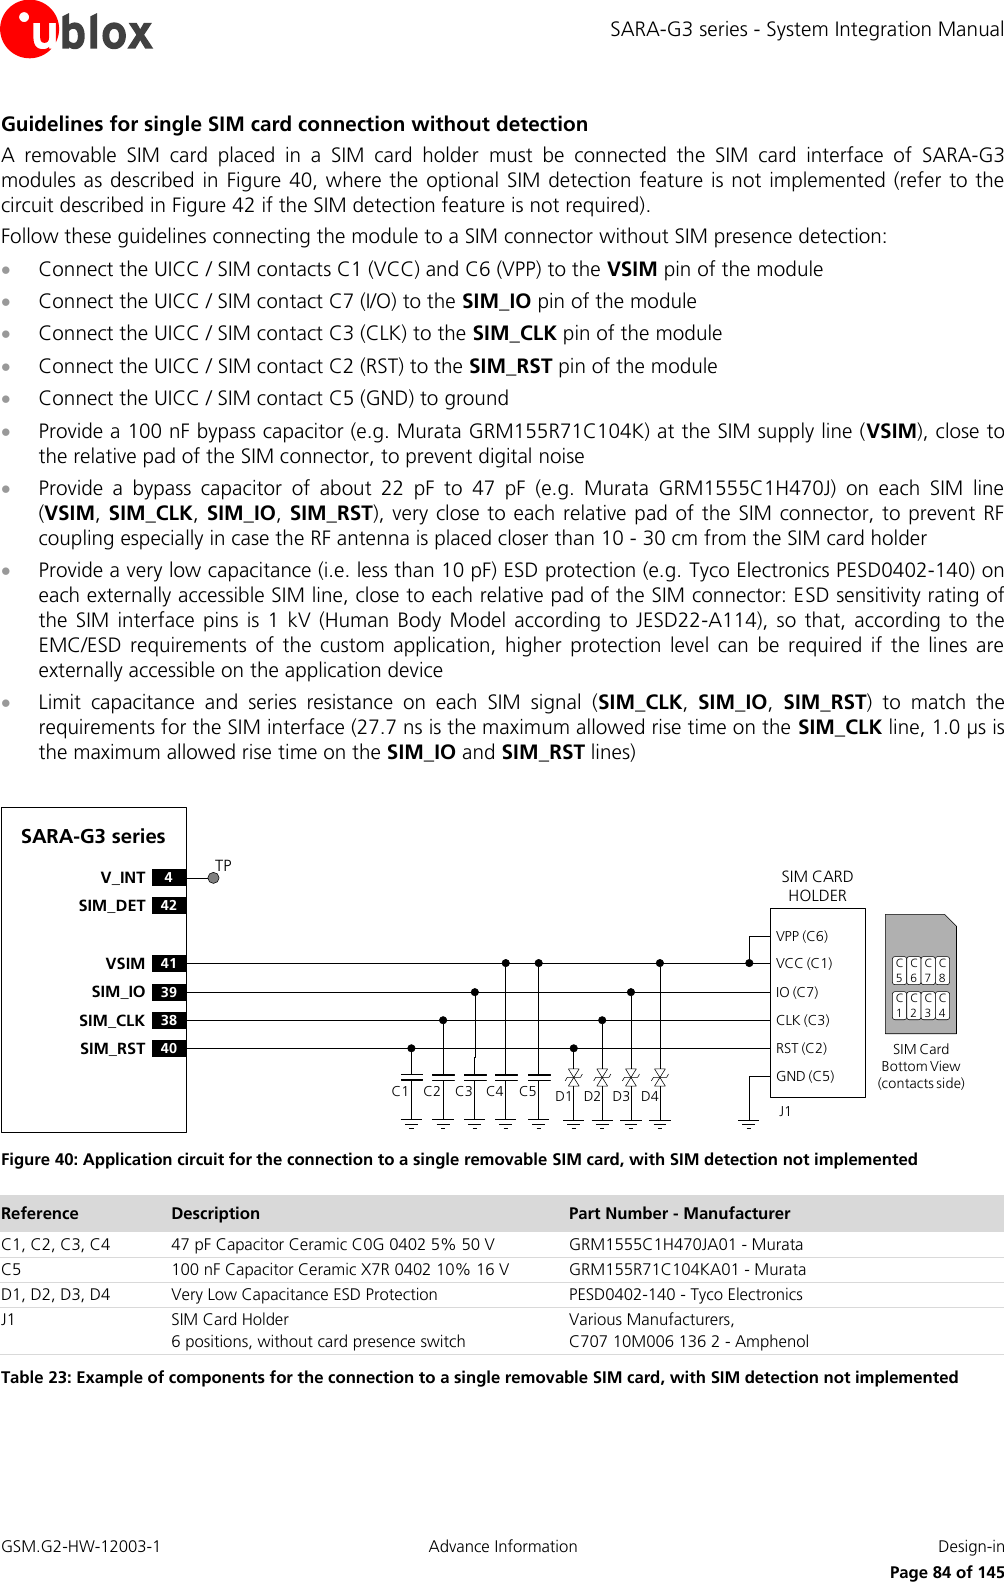 SARA-G3 series - System Integration Manual GSM.G2-HW-12003-1  Advance Information  Design-in     Page 84 of 145 Guidelines for single SIM card connection without detection A  removable  SIM  card  placed  in  a  SIM  card  holder  must  be  connected  the  SIM  card  interface  of  SARA-G3 modules as described in Figure 40, where the optional SIM detection feature is not implemented (refer to the circuit described in Figure 42 if the SIM detection feature is not required). Follow these guidelines connecting the module to a SIM connector without SIM presence detection:  Connect the UICC / SIM contacts C1 (VCC) and C6 (VPP) to the VSIM pin of the module  Connect the UICC / SIM contact C7 (I/O) to the SIM_IO pin of the module  Connect the UICC / SIM contact C3 (CLK) to the SIM_CLK pin of the module  Connect the UICC / SIM contact C2 (RST) to the SIM_RST pin of the module  Connect the UICC / SIM contact C5 (GND) to ground  Provide a 100 nF bypass capacitor (e.g. Murata GRM155R71C104K) at the SIM supply line (VSIM), close to the relative pad of the SIM connector, to prevent digital noise  Provide  a  bypass  capacitor  of  about  22  pF  to  47  pF  (e.g.  Murata  GRM1555C1H470J)  on  each  SIM  line (VSIM, SIM_CLK, SIM_IO,  SIM_RST), very close to each relative pad of the SIM connector, to prevent RF coupling especially in case the RF antenna is placed closer than 10 - 30 cm from the SIM card holder  Provide a very low capacitance (i.e. less than 10 pF) ESD protection (e.g. Tyco Electronics PESD0402-140) on each externally accessible SIM line, close to each relative pad of the SIM connector: ESD sensitivity rating of the  SIM interface pins is 1  kV  (Human Body  Model  according  to  JESD22-A114),  so  that,  according to  the EMC/ESD  requirements  of  the  custom  application,  higher  protection  level  can  be  required  if  the  lines  are externally accessible on the application device  Limit  capacitance  and  series  resistance  on  each  SIM  signal  (SIM_CLK,  SIM_IO,  SIM_RST)  to  match  the requirements for the SIM interface (27.7 ns is the maximum allowed rise time on the SIM_CLK line, 1.0 µs is the maximum allowed rise time on the SIM_IO and SIM_RST lines)  SARA-G3 series41VSIM39SIM_IO38SIM_CLK40SIM_RST4V_INT42SIM_DETSIM CARD HOLDERC5C6C7C1C2C3SIM Card Bottom View (contacts side)C1VPP (C6)VCC (C1)IO (C7)CLK (C3)RST (C2)GND (C5)C2 C3 C5J1C4 D1 D2 D3 D4C8C4TP Figure 40: Application circuit for the connection to a single removable SIM card, with SIM detection not implemented Reference Description Part Number - Manufacturer C1, C2, C3, C4 47 pF Capacitor Ceramic C0G 0402 5% 50 V GRM1555C1H470JA01 - Murata C5 100 nF Capacitor Ceramic X7R 0402 10% 16 V GRM155R71C104KA01 - Murata D1, D2, D3, D4 Very Low Capacitance ESD Protection PESD0402-140 - Tyco Electronics  J1 SIM Card Holder 6 positions, without card presence switch Various Manufacturers, C707 10M006 136 2 - Amphenol Table 23: Example of components for the connection to a single removable SIM card, with SIM detection not implemented  